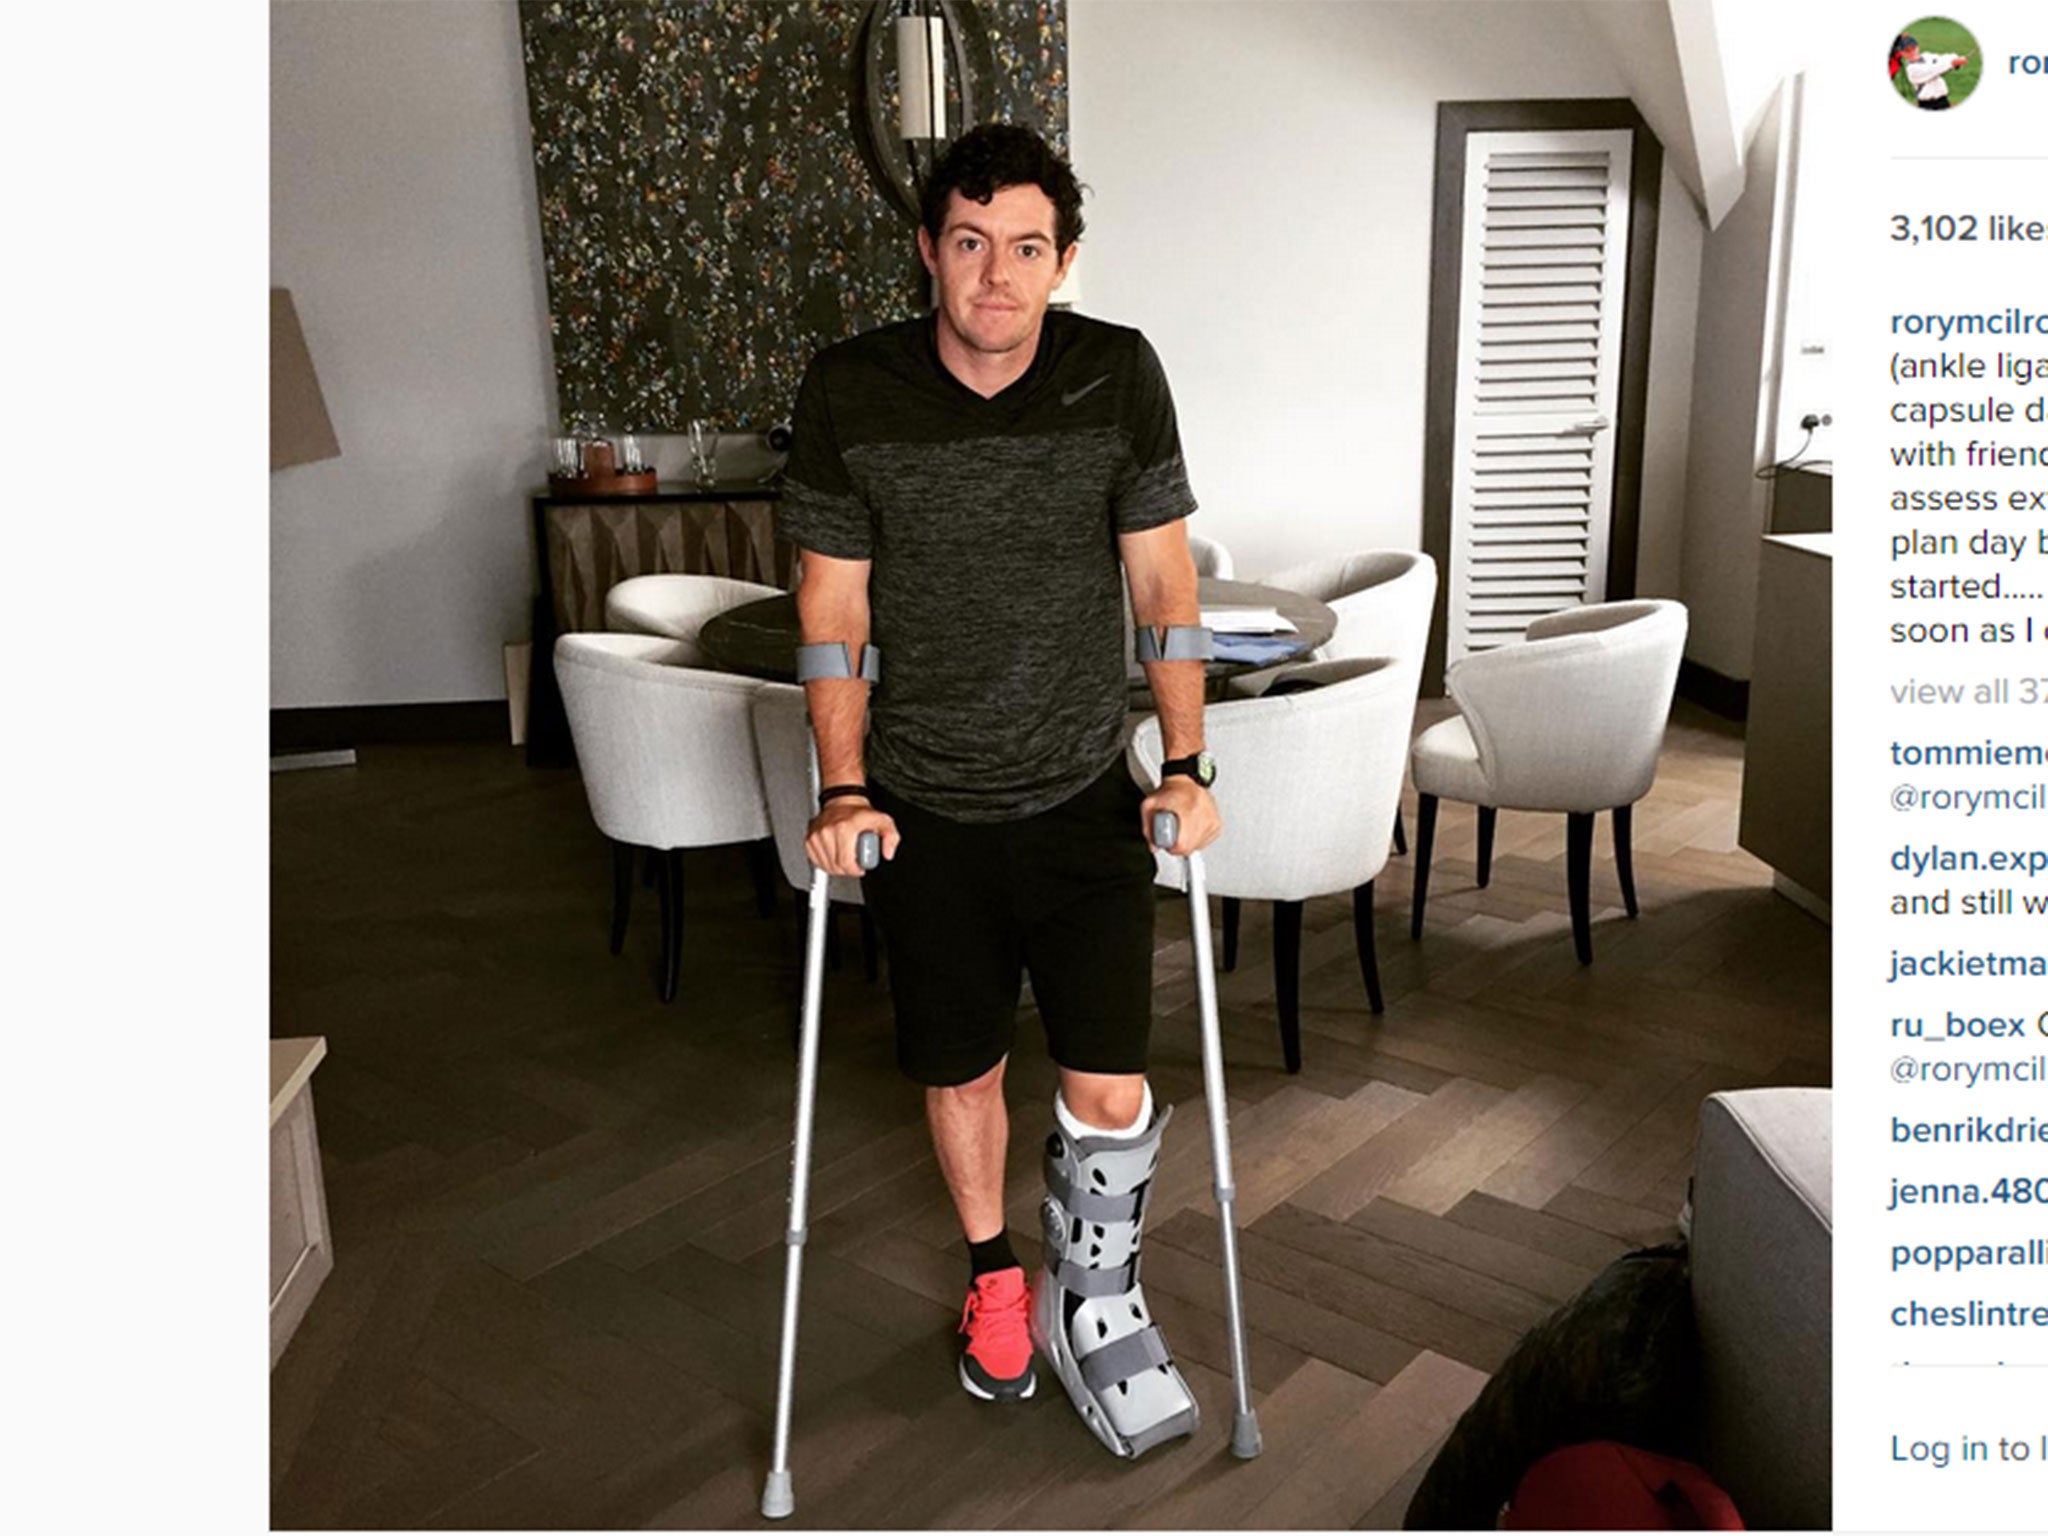 Rory McIlroy's Instagram post shows his injured ankle